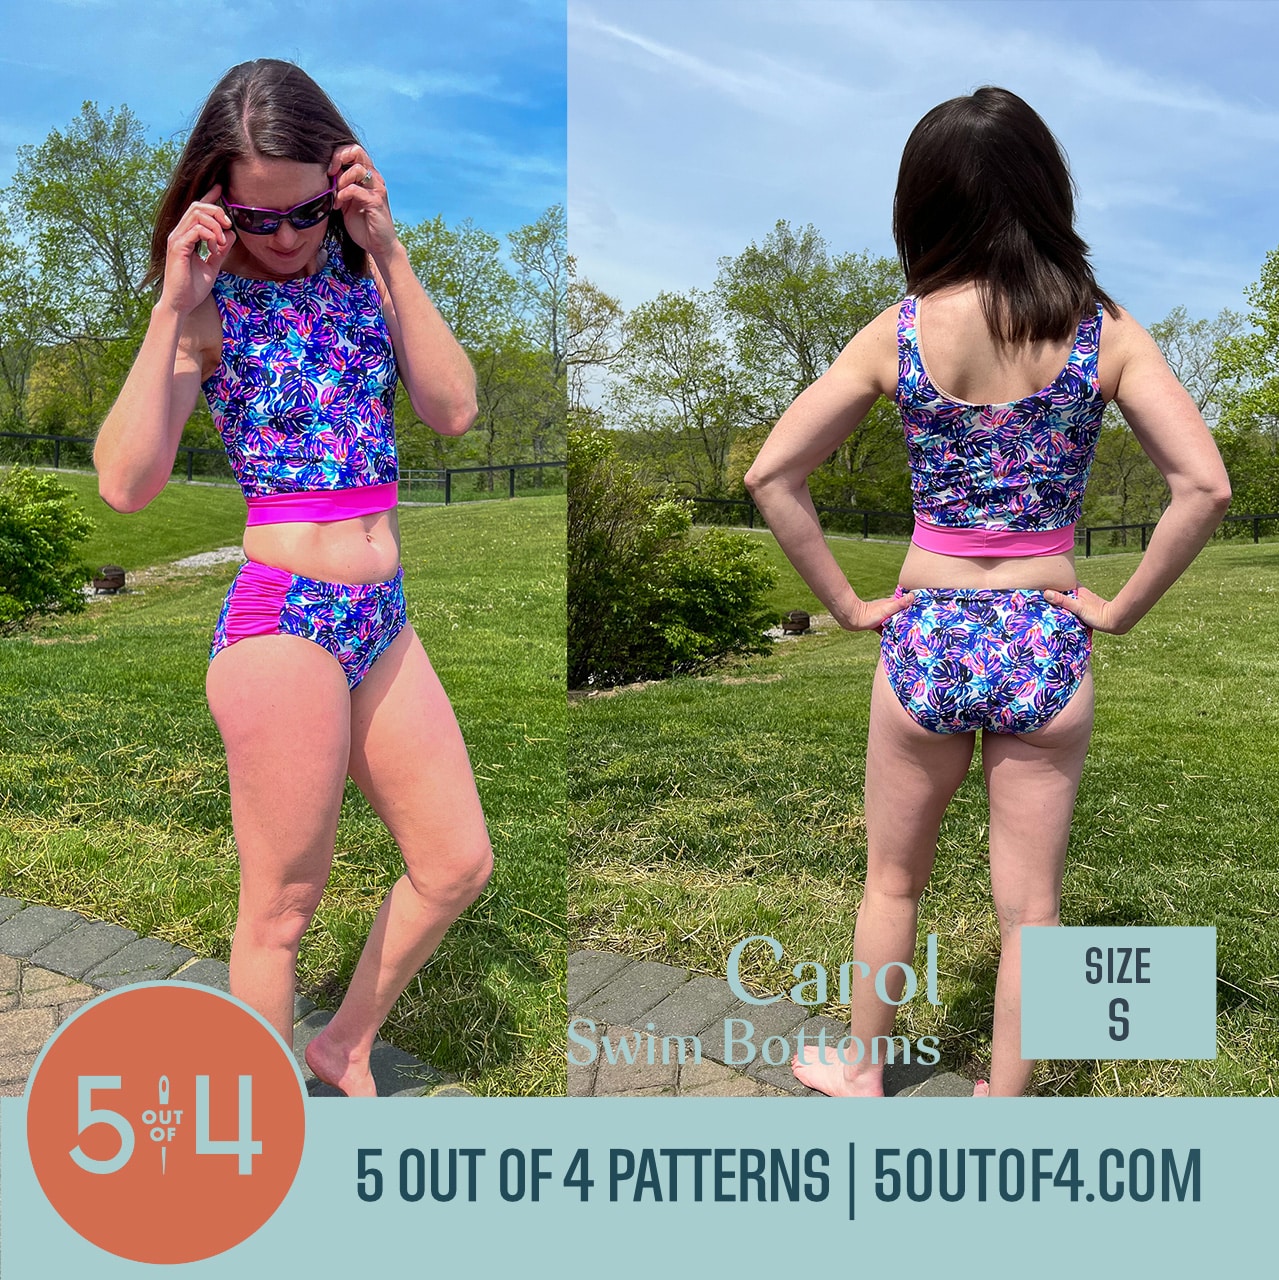 Carol Colorblocked Swim Bottoms - 5 out of 4 Patterns